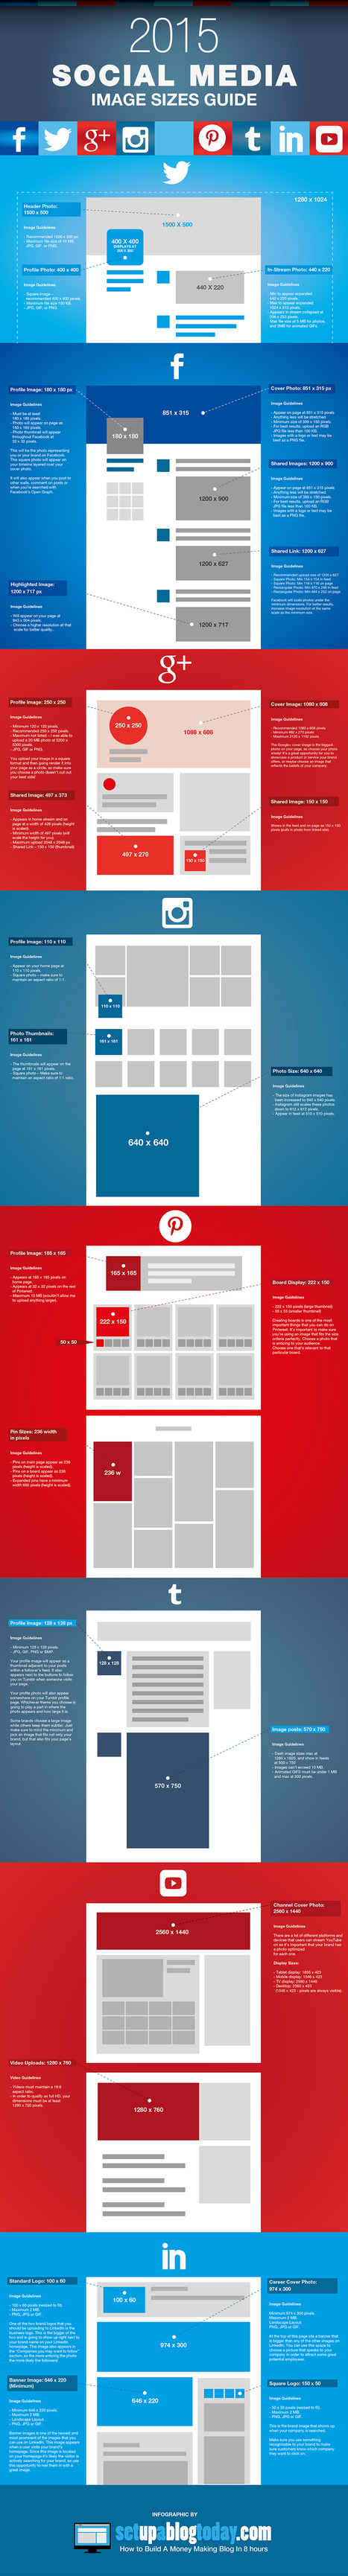 Here's your ultimate social media cheat sheet for 2015 [Infographic] | memeburn | The MarTech Digest | Scoop.it